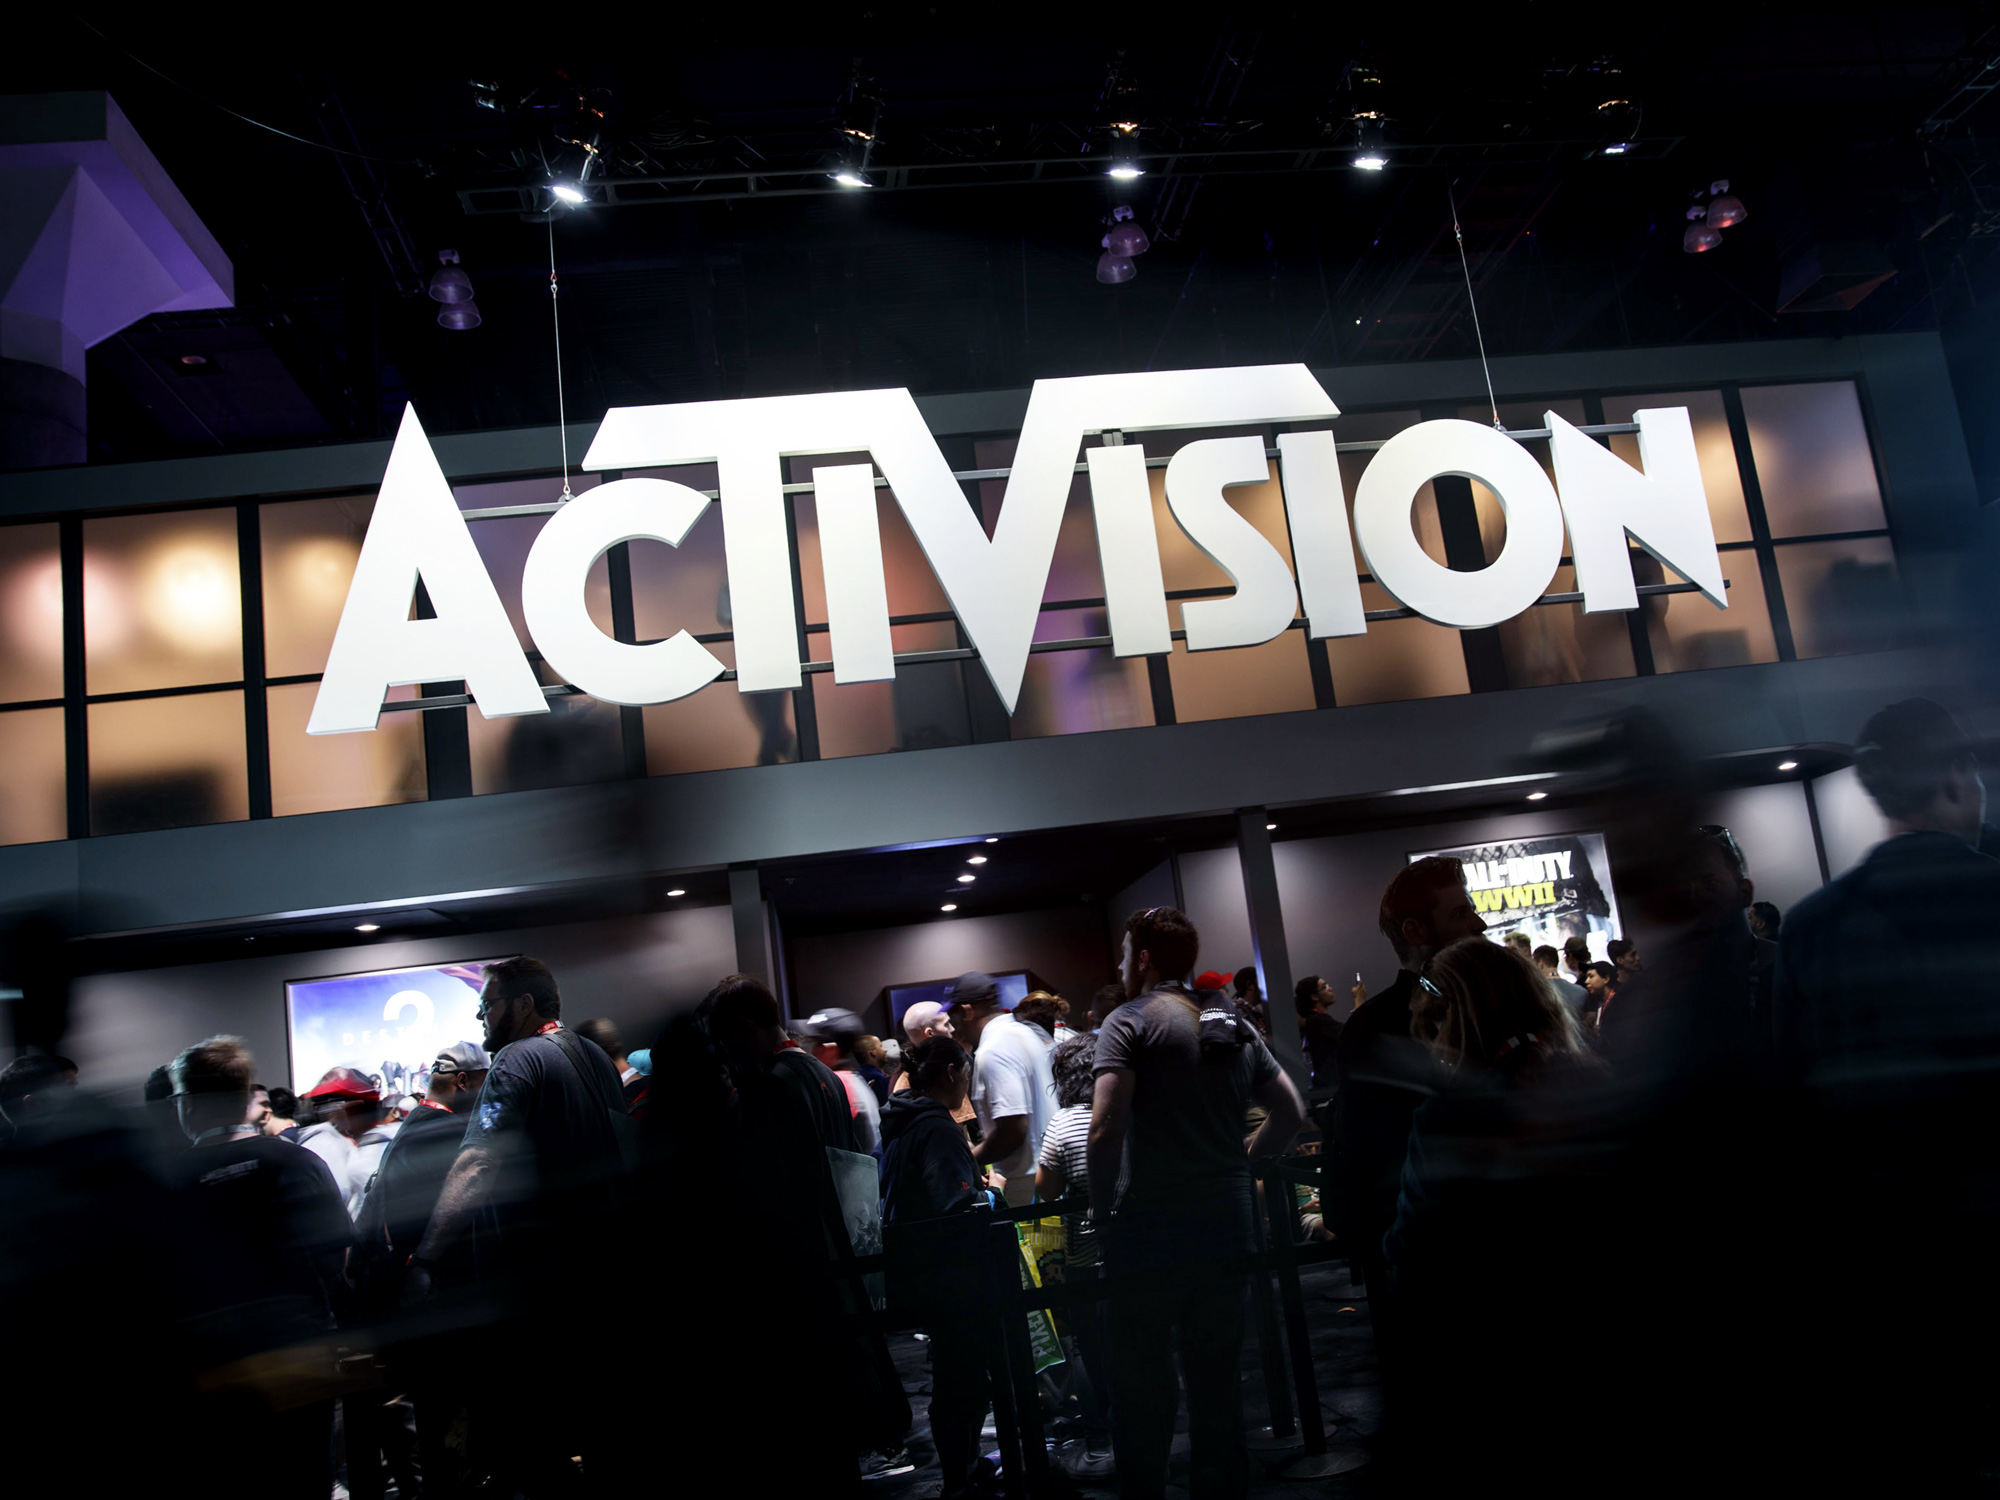 Microsoft-Activision deal provisionally approved by U.K. regulator